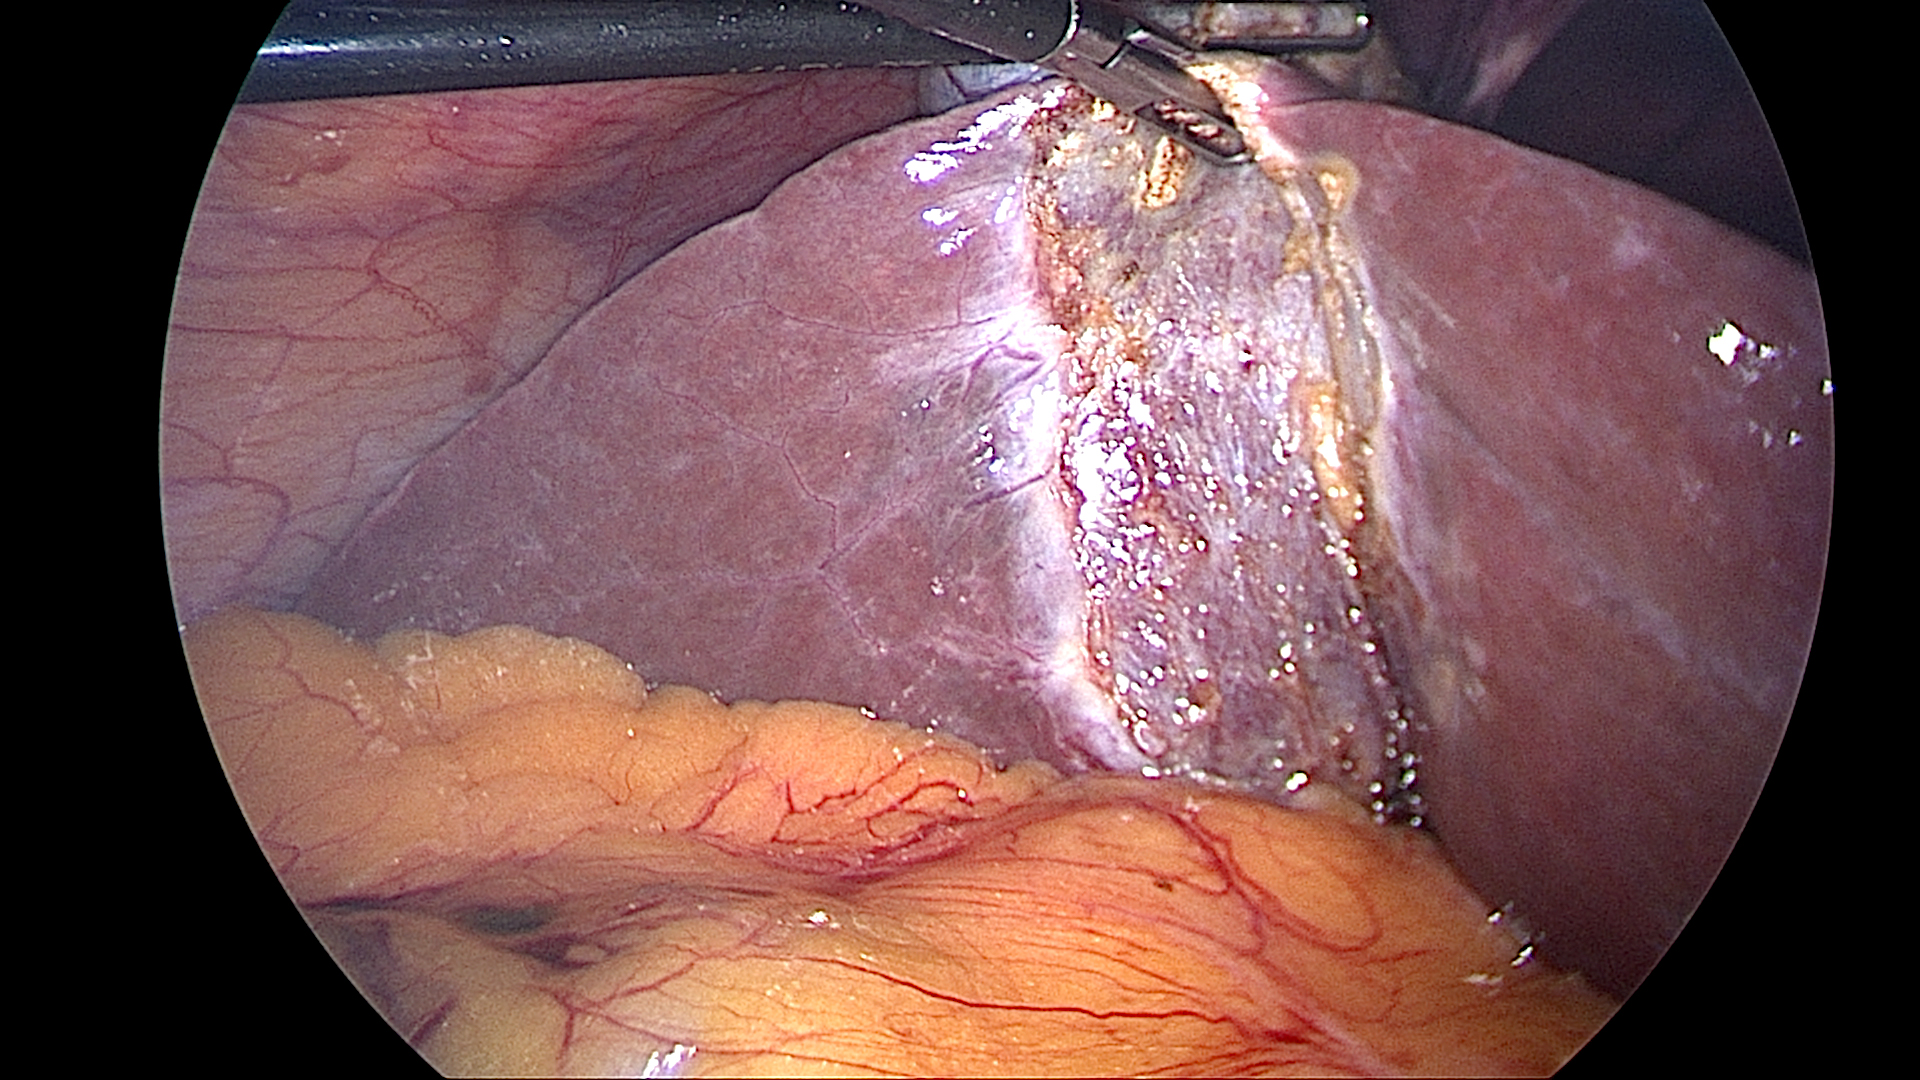 Cystic plate after gallbladder removal